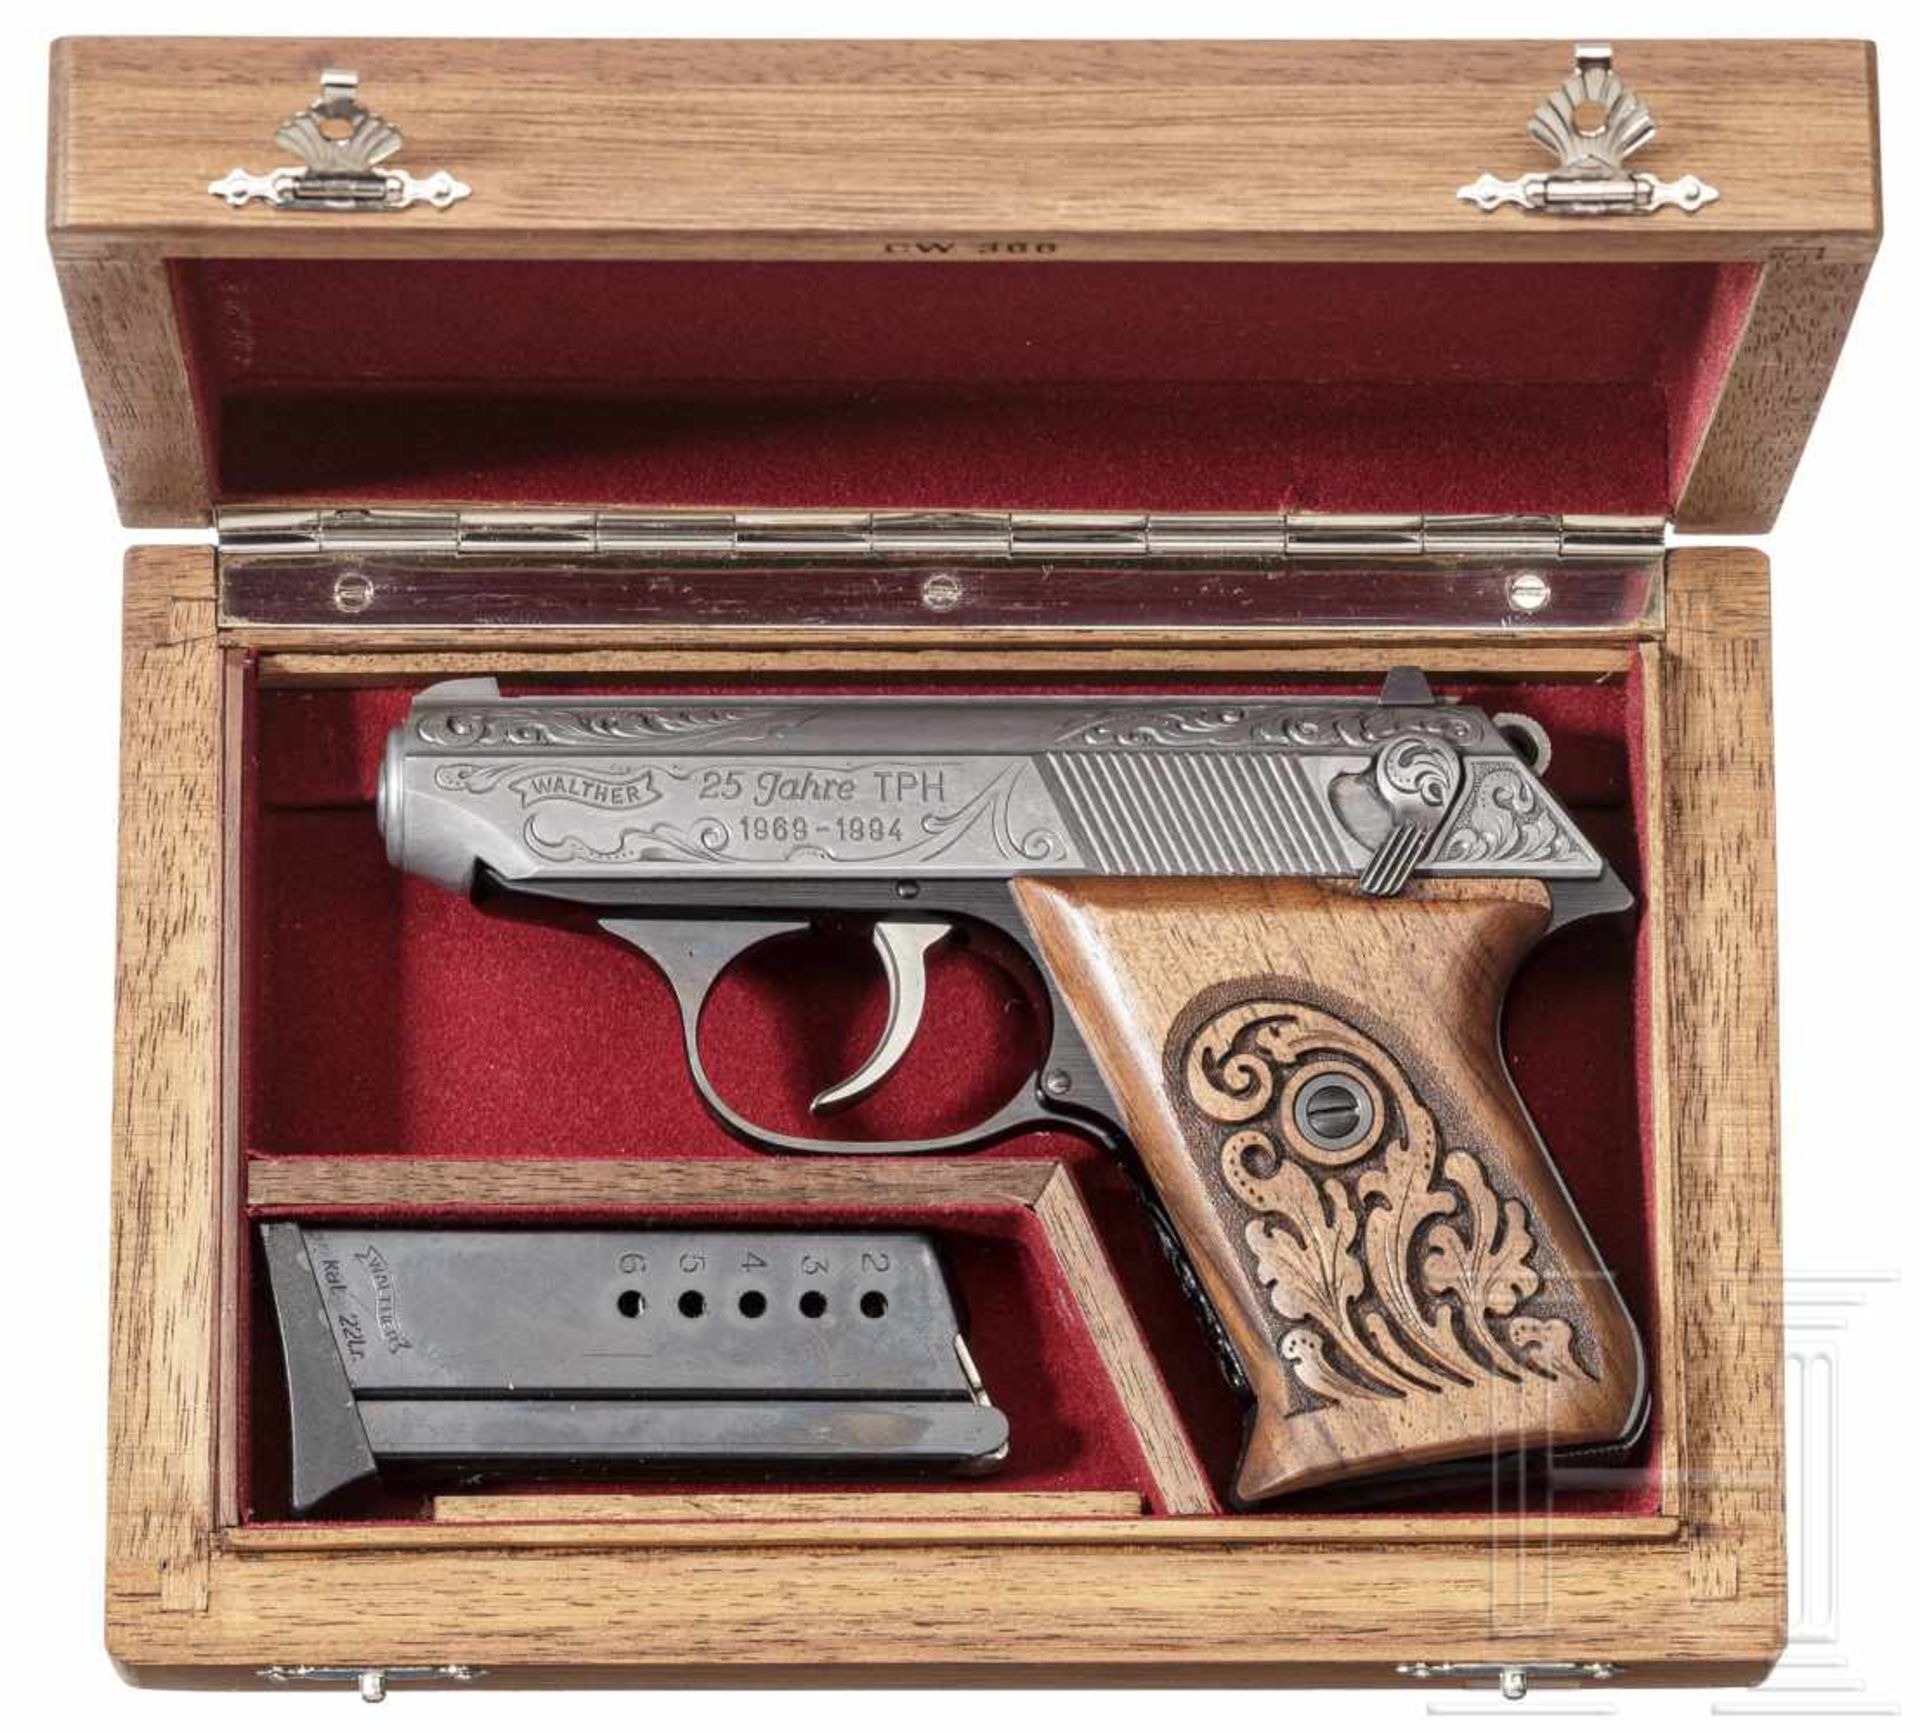 A Walther TPH, Commemorative "25 Years TPH", new in box